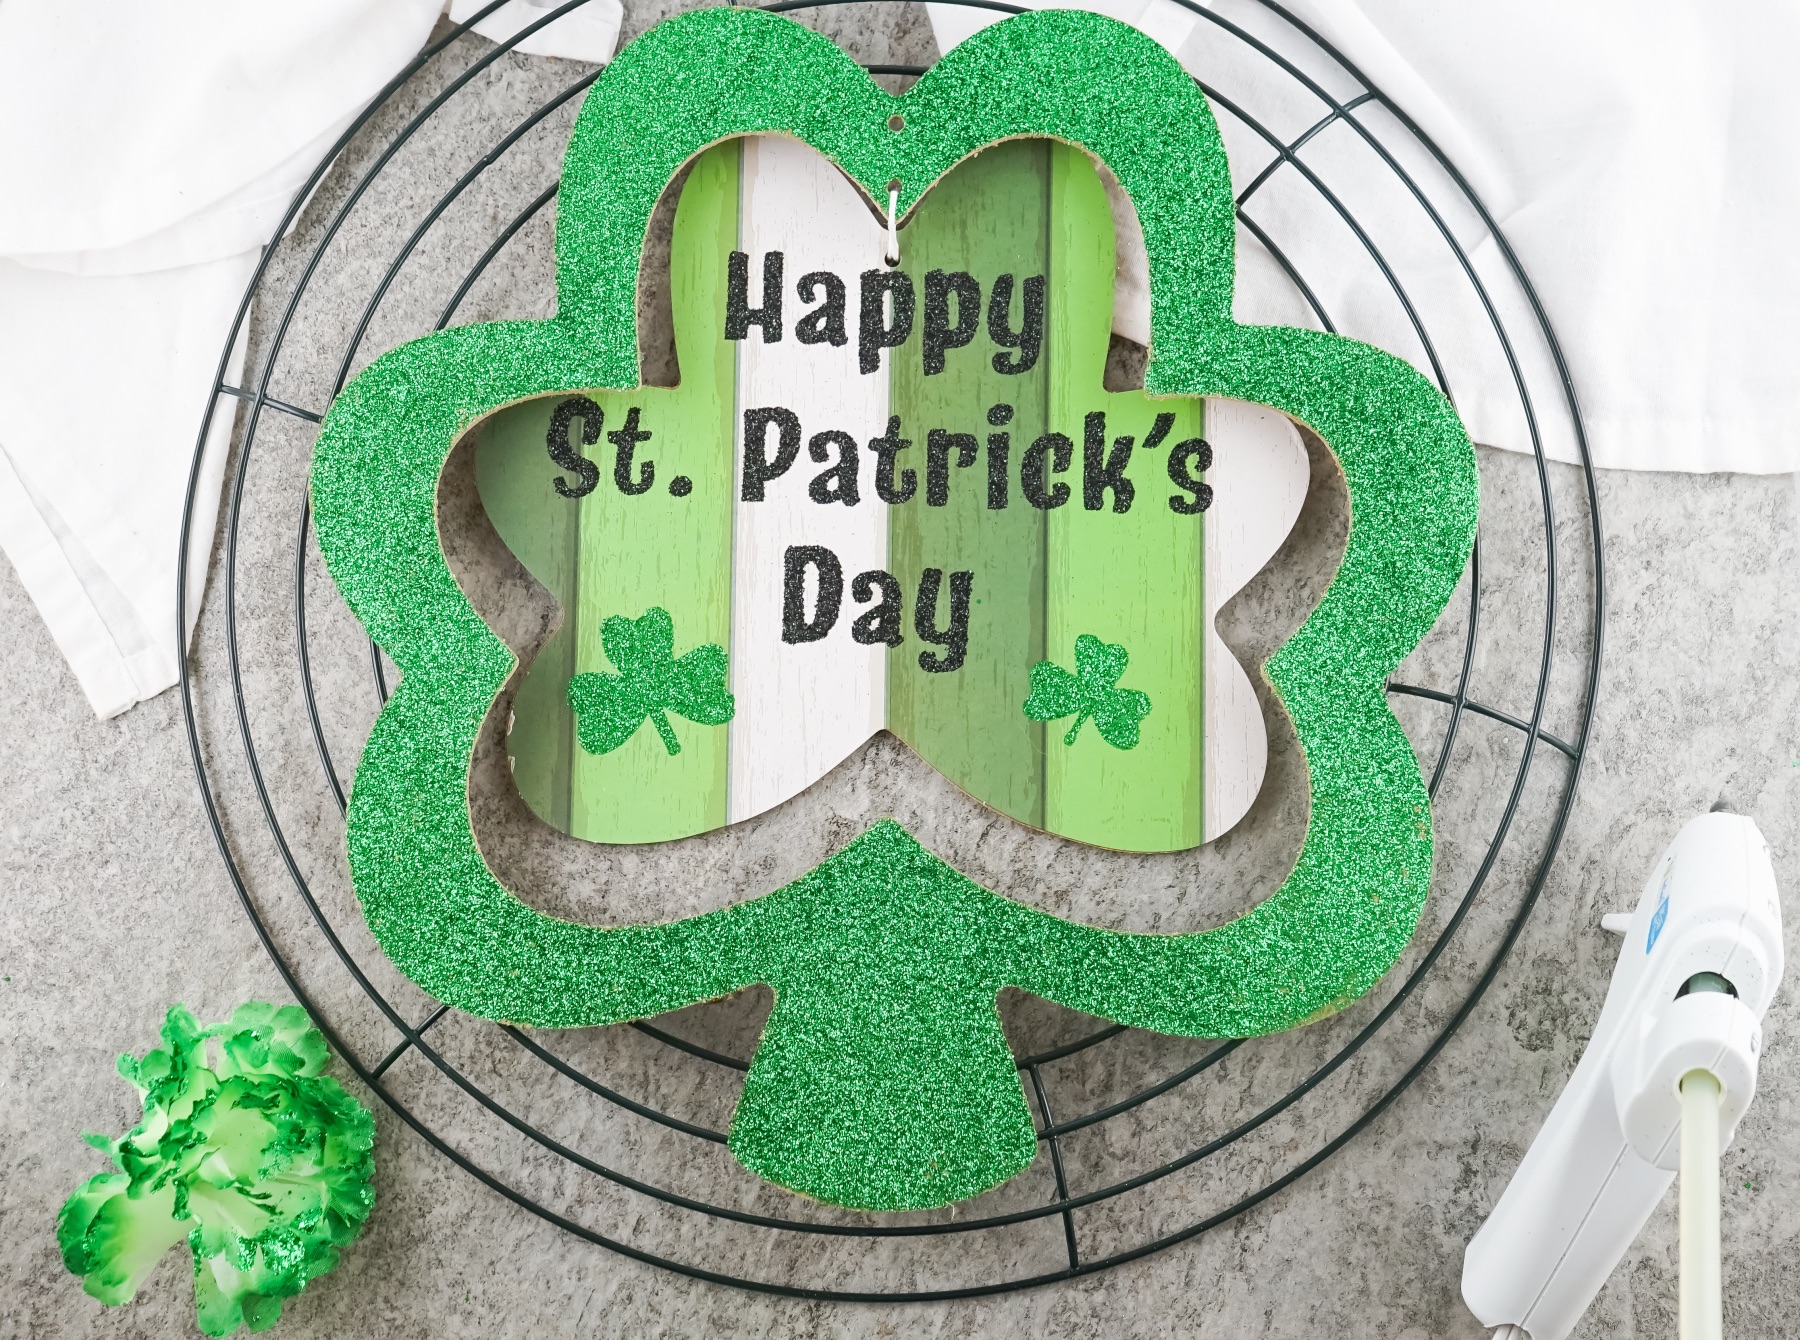 place the shamrock in the center of the wreath base